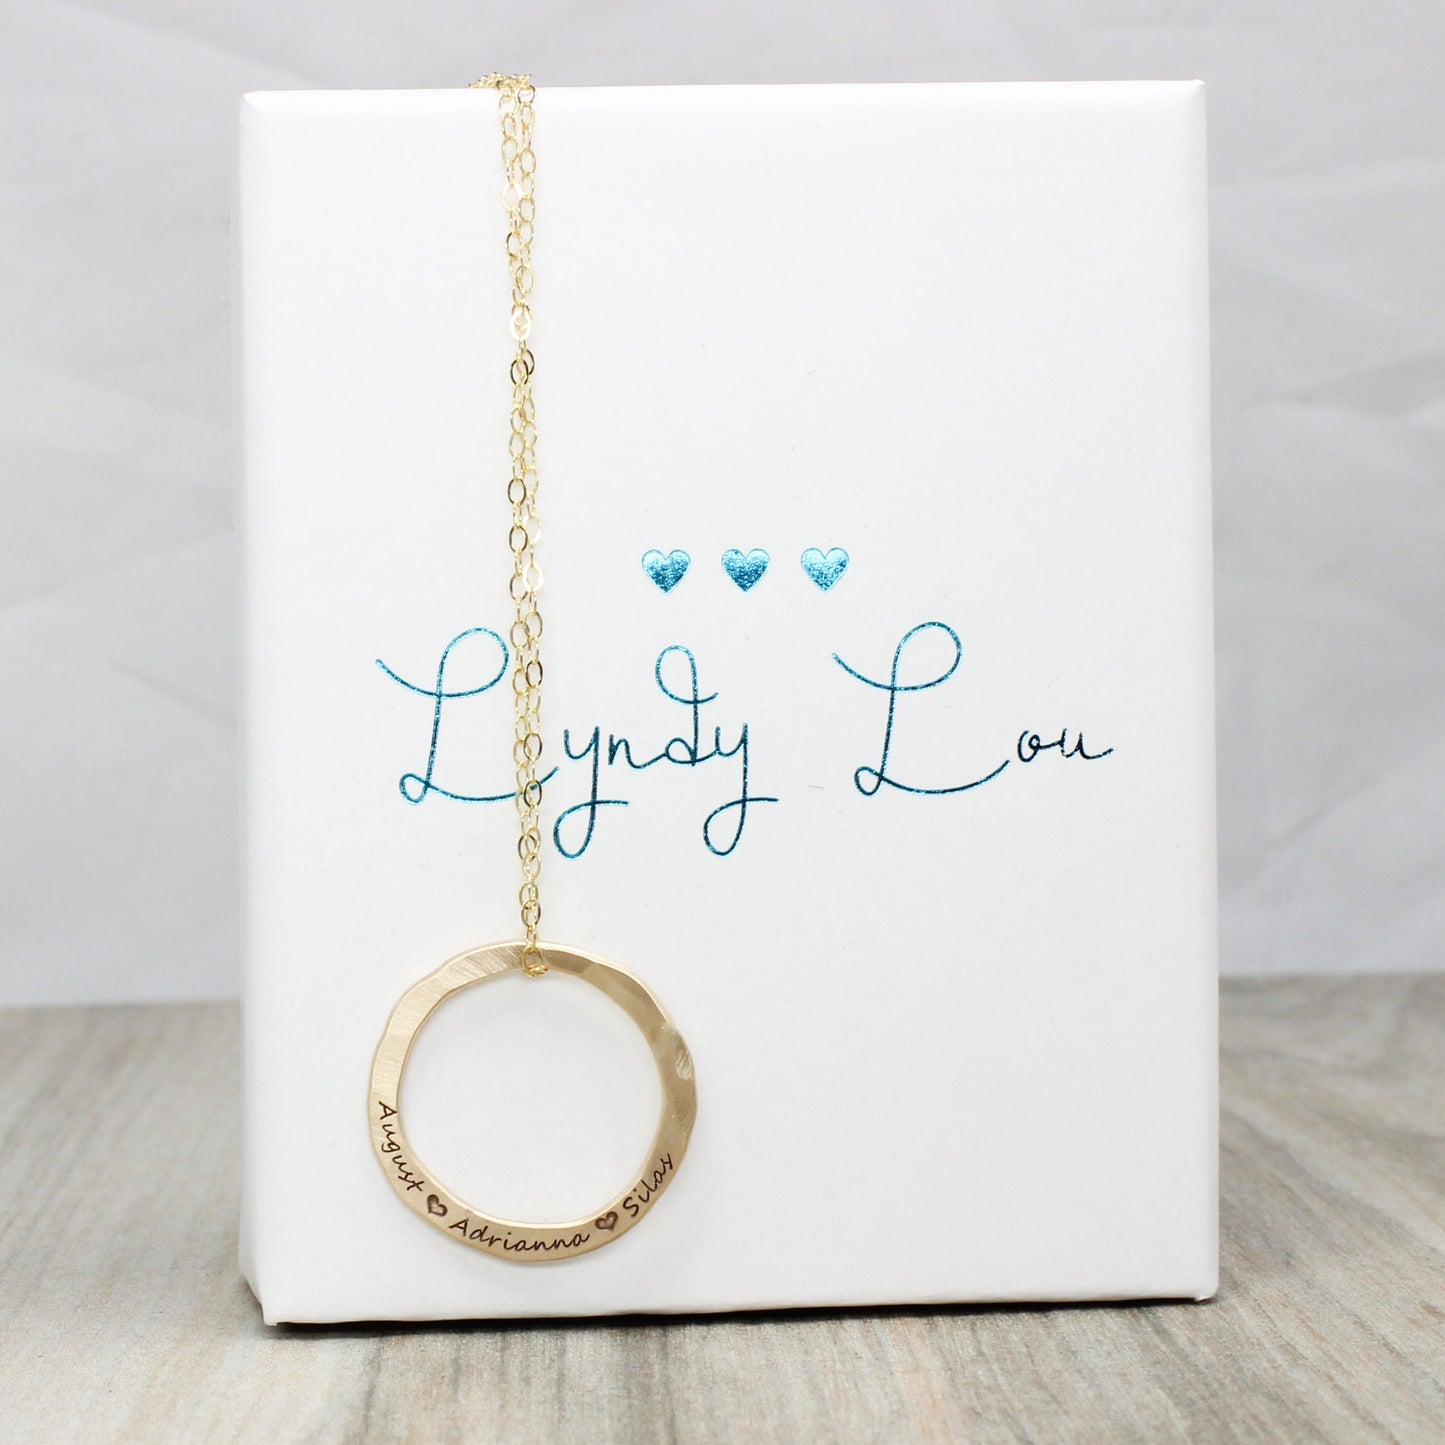 Sterling Silver Hammered Circle Name Necklace | Custom Engraved Mom Necklace Pendant | Handmade Personalized Jewelry